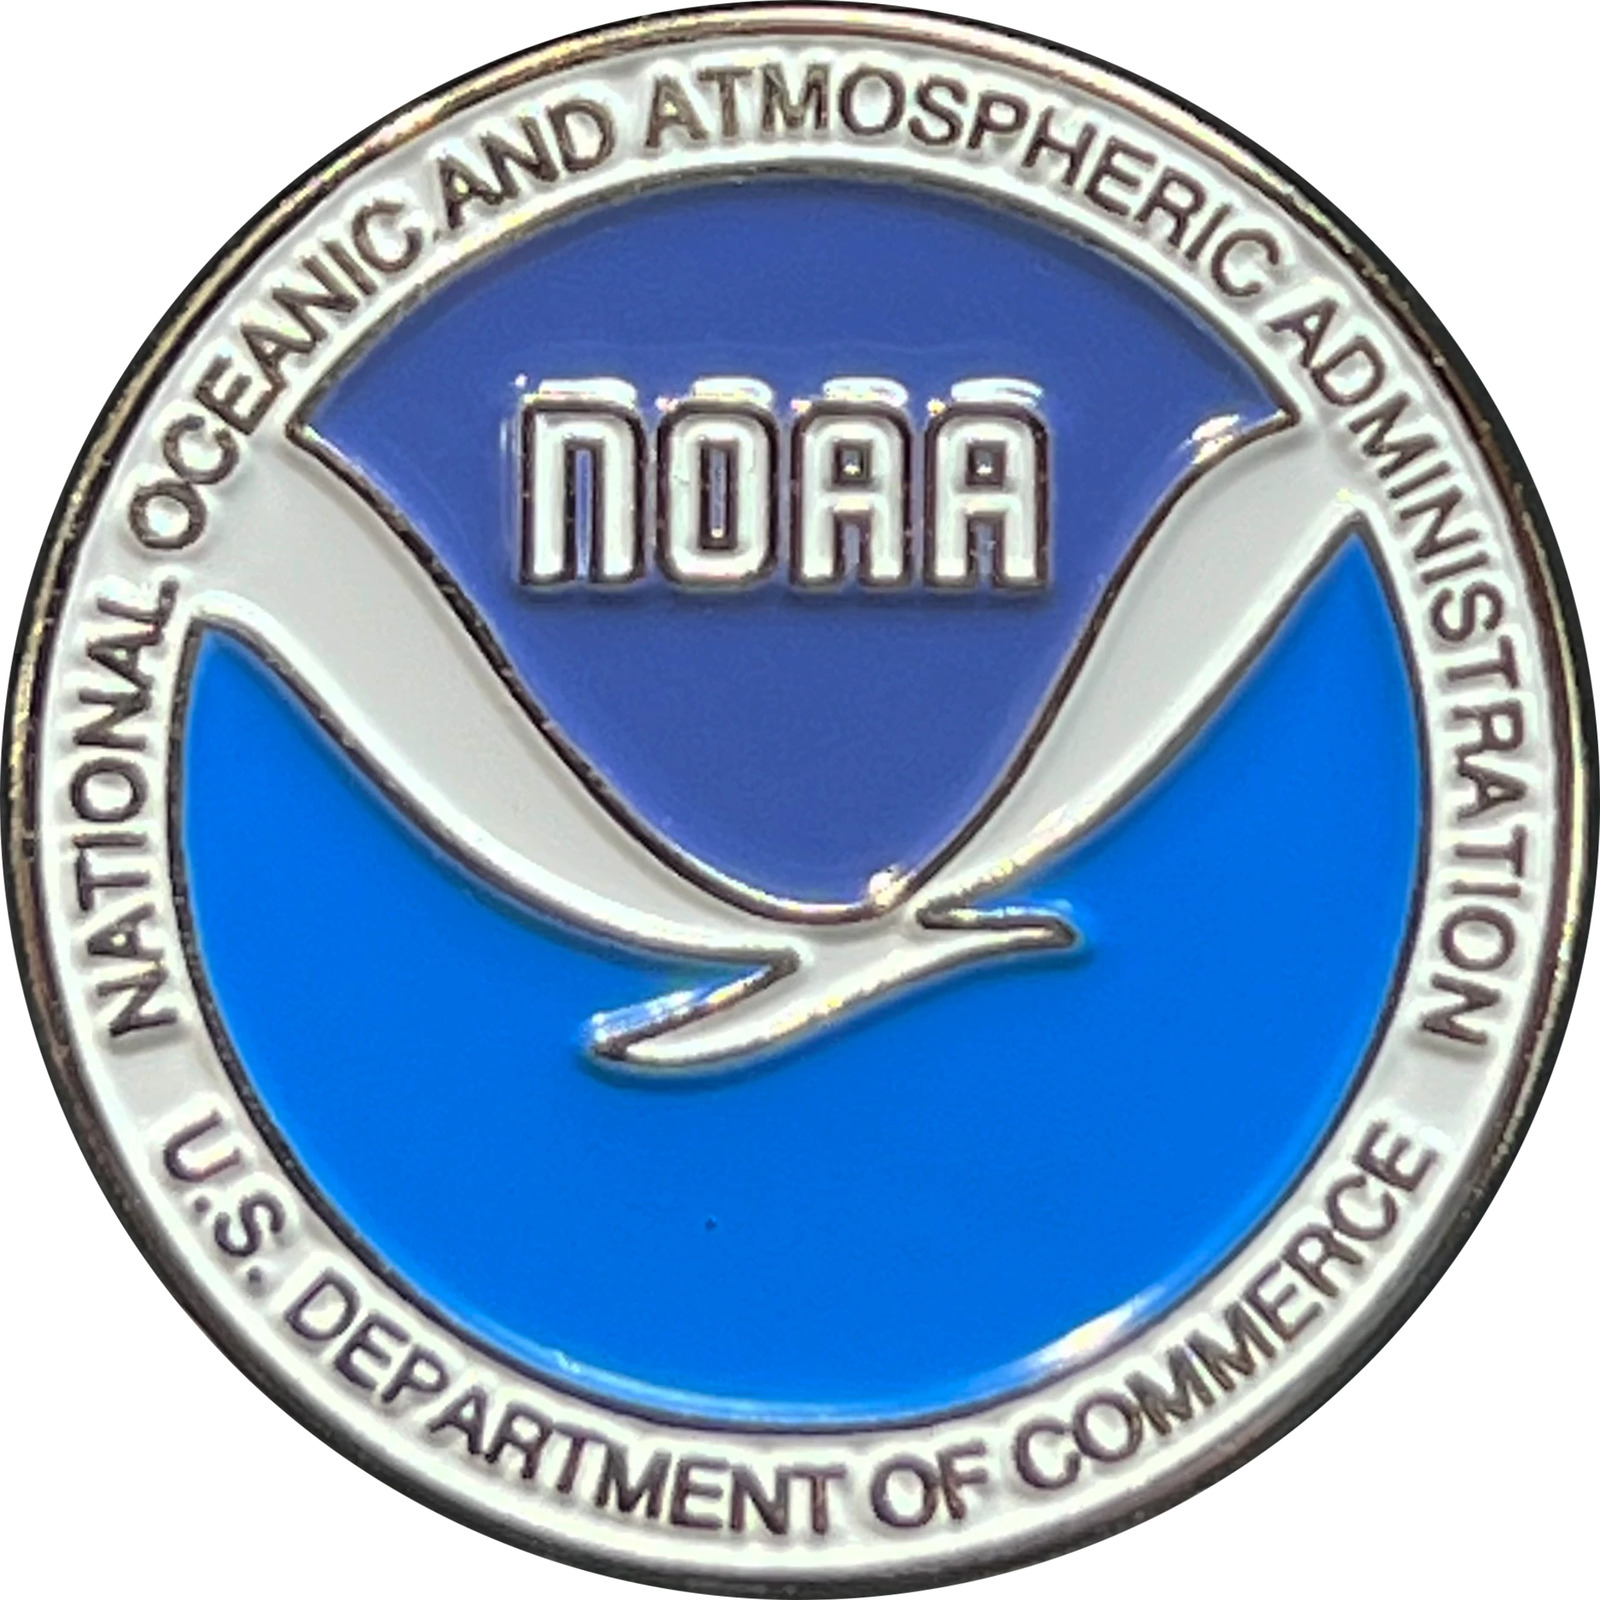 GL4-019 NOAA National Oceanic Atmospheric Administration Department of Commerce